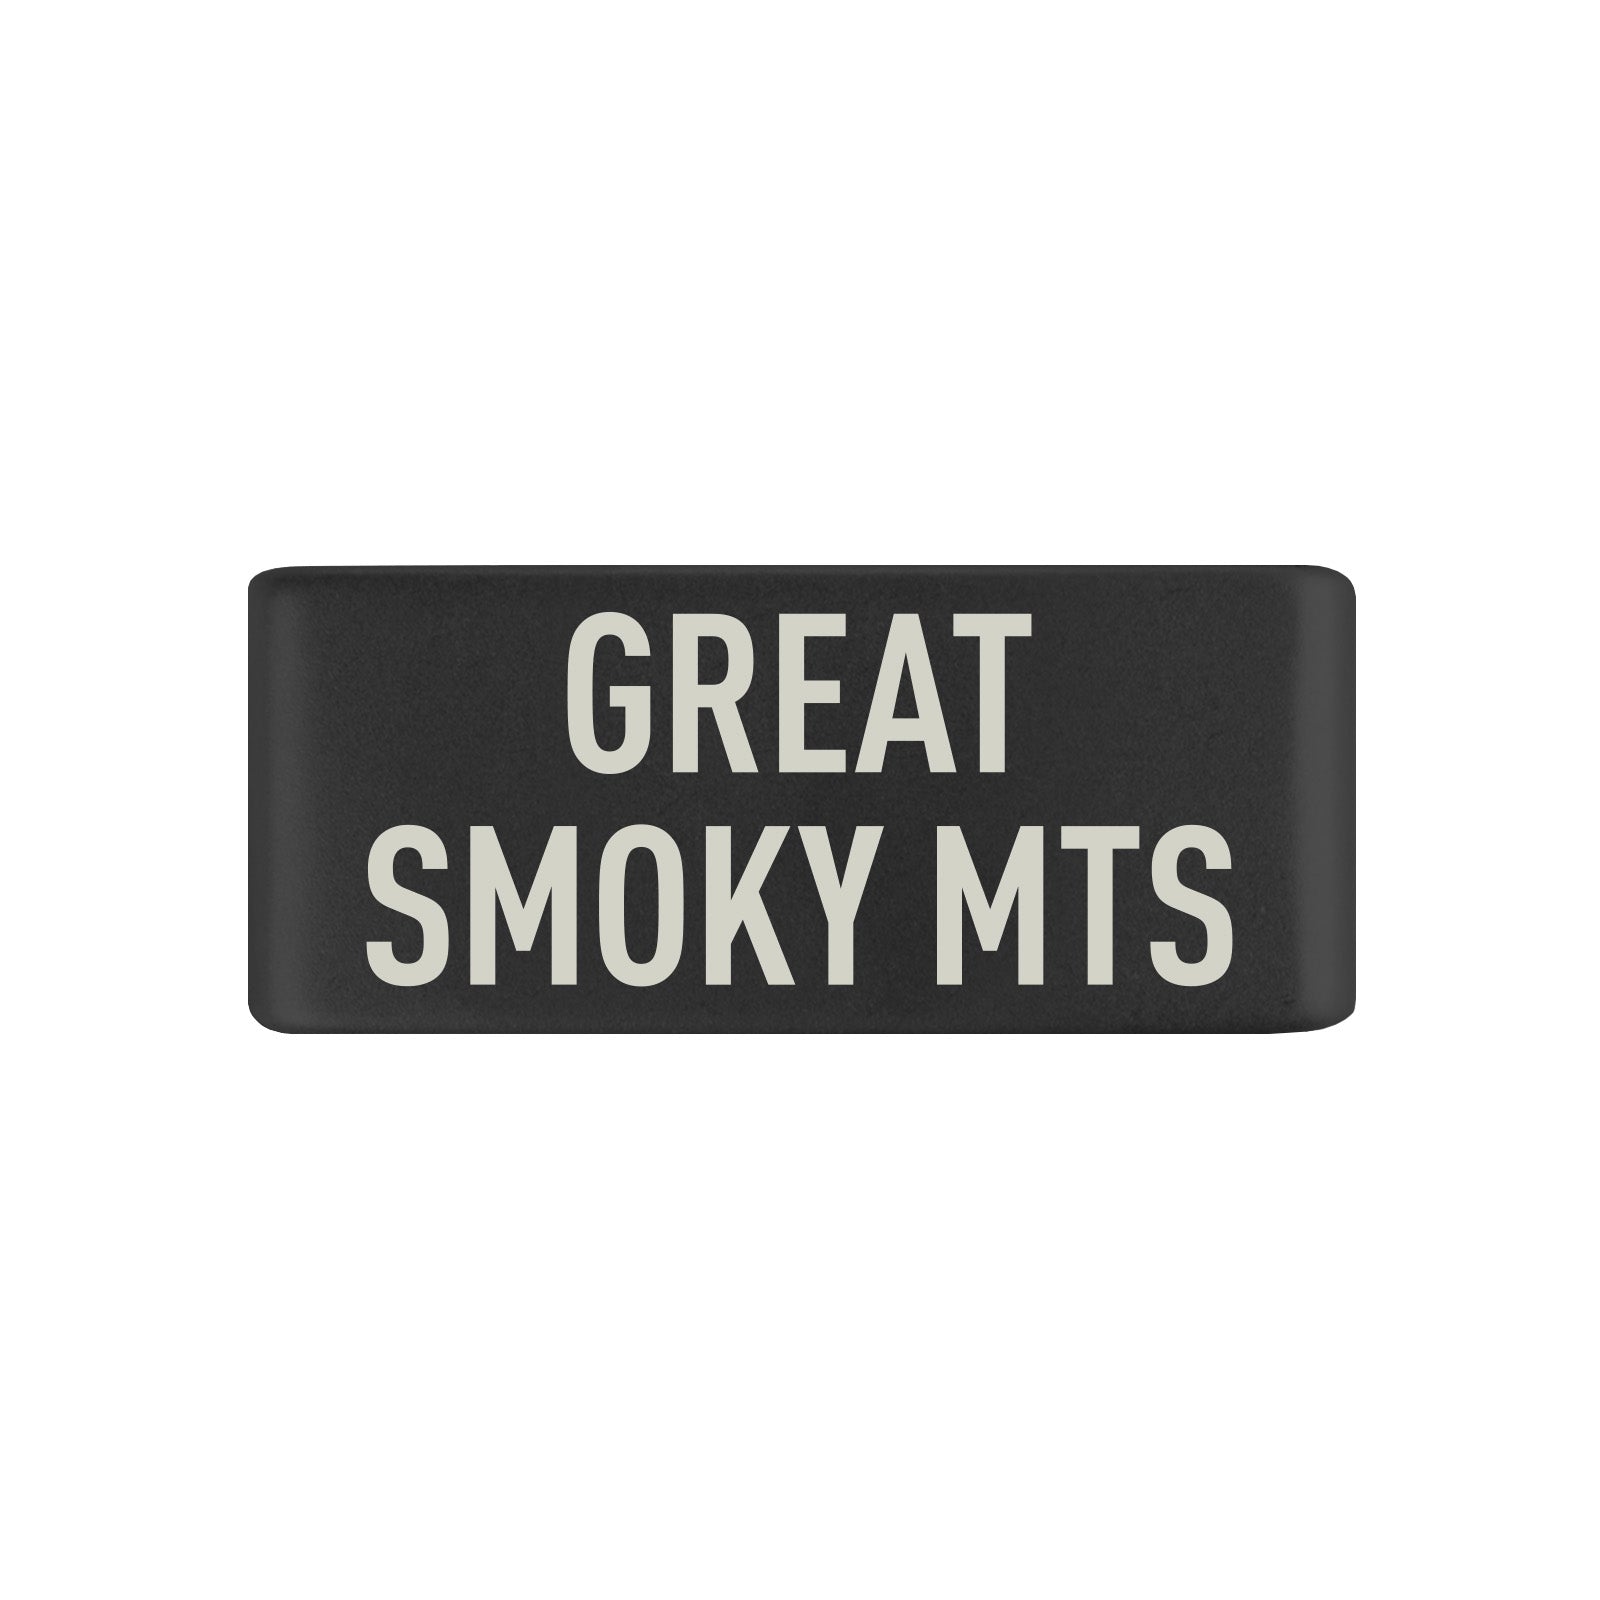 Great Smoky Mountains Badge Badge 13mm - ROAD iD